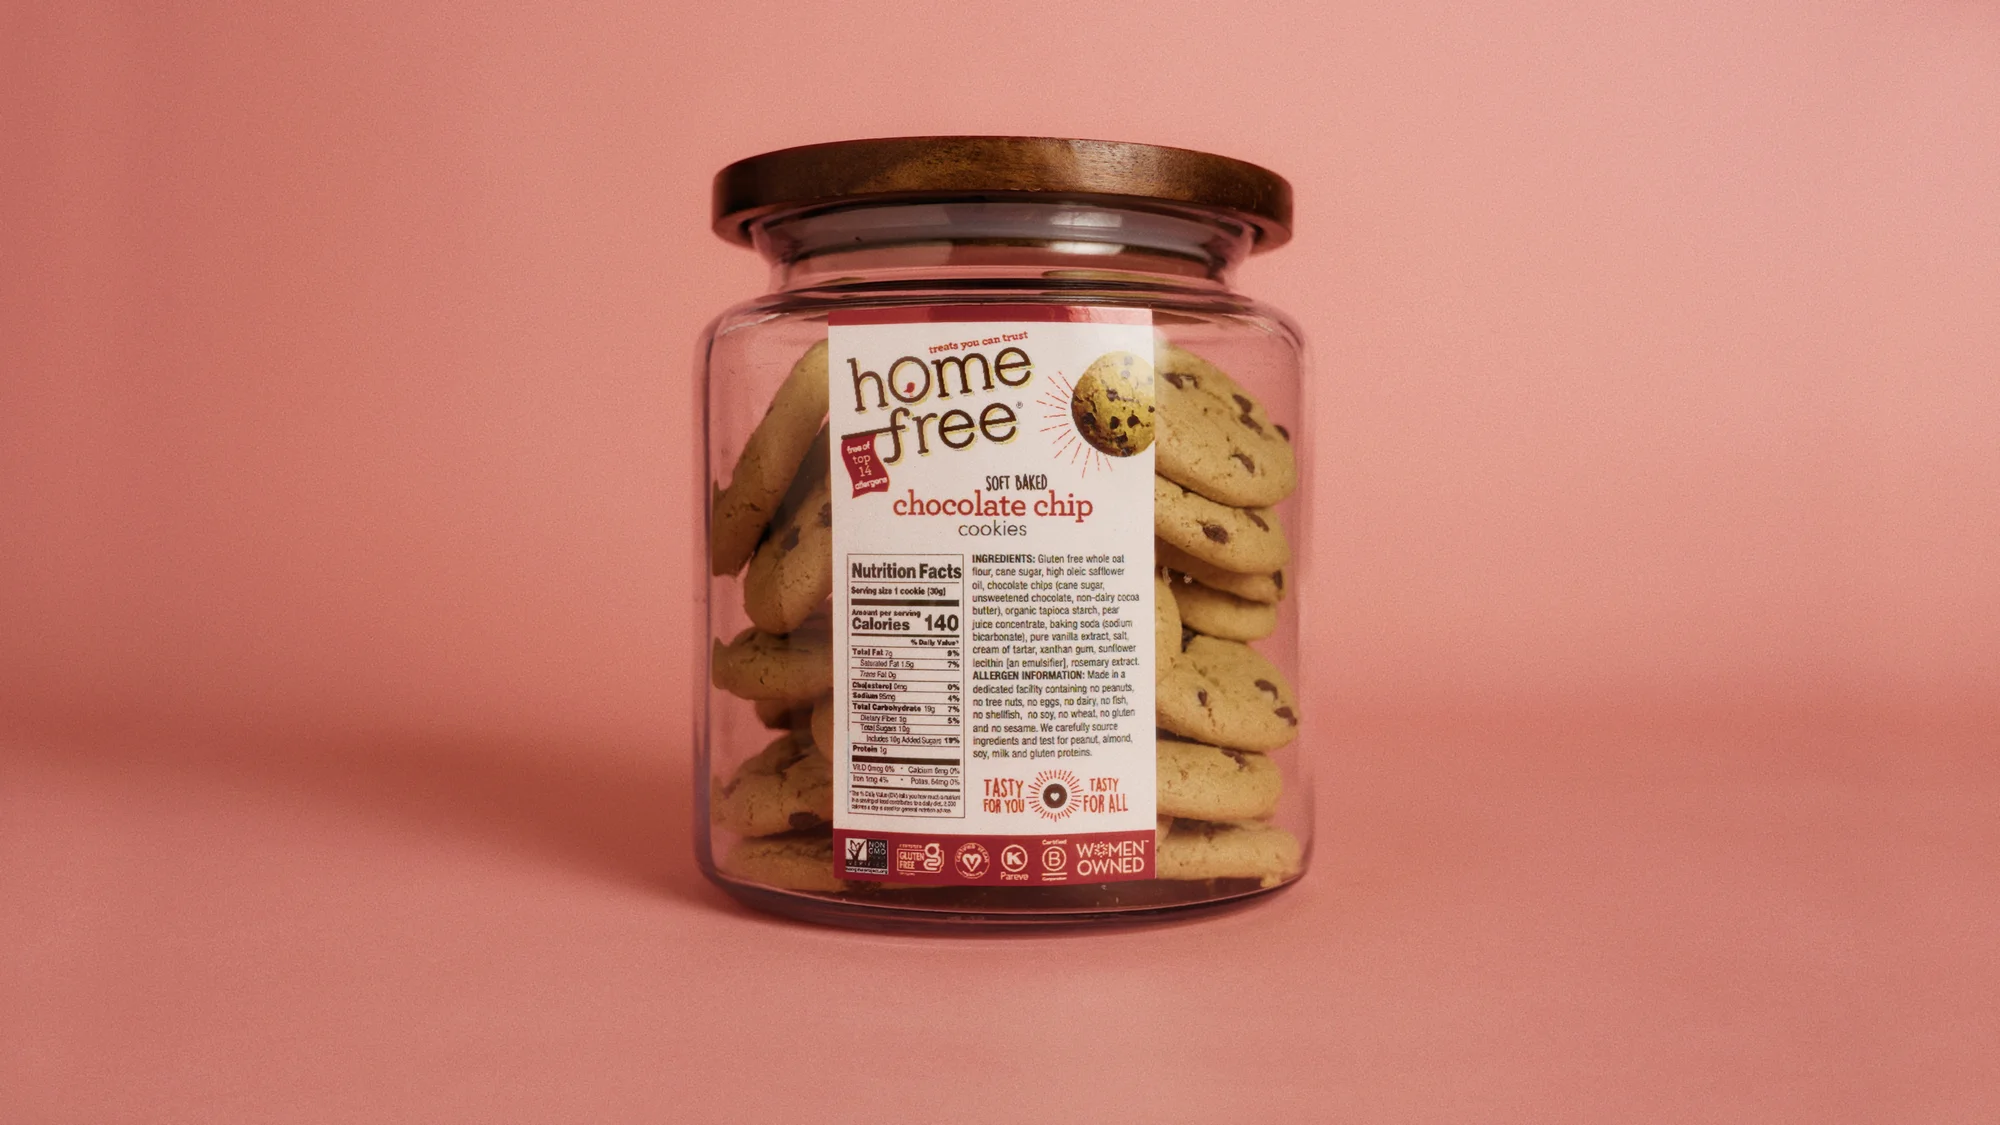 Homefree provides allergy friendly baked goods including vegan and gluten free cookies in bulk and were chosen to test their products at select Google foodspaces as part of the Single-Use Plastics Challenge.